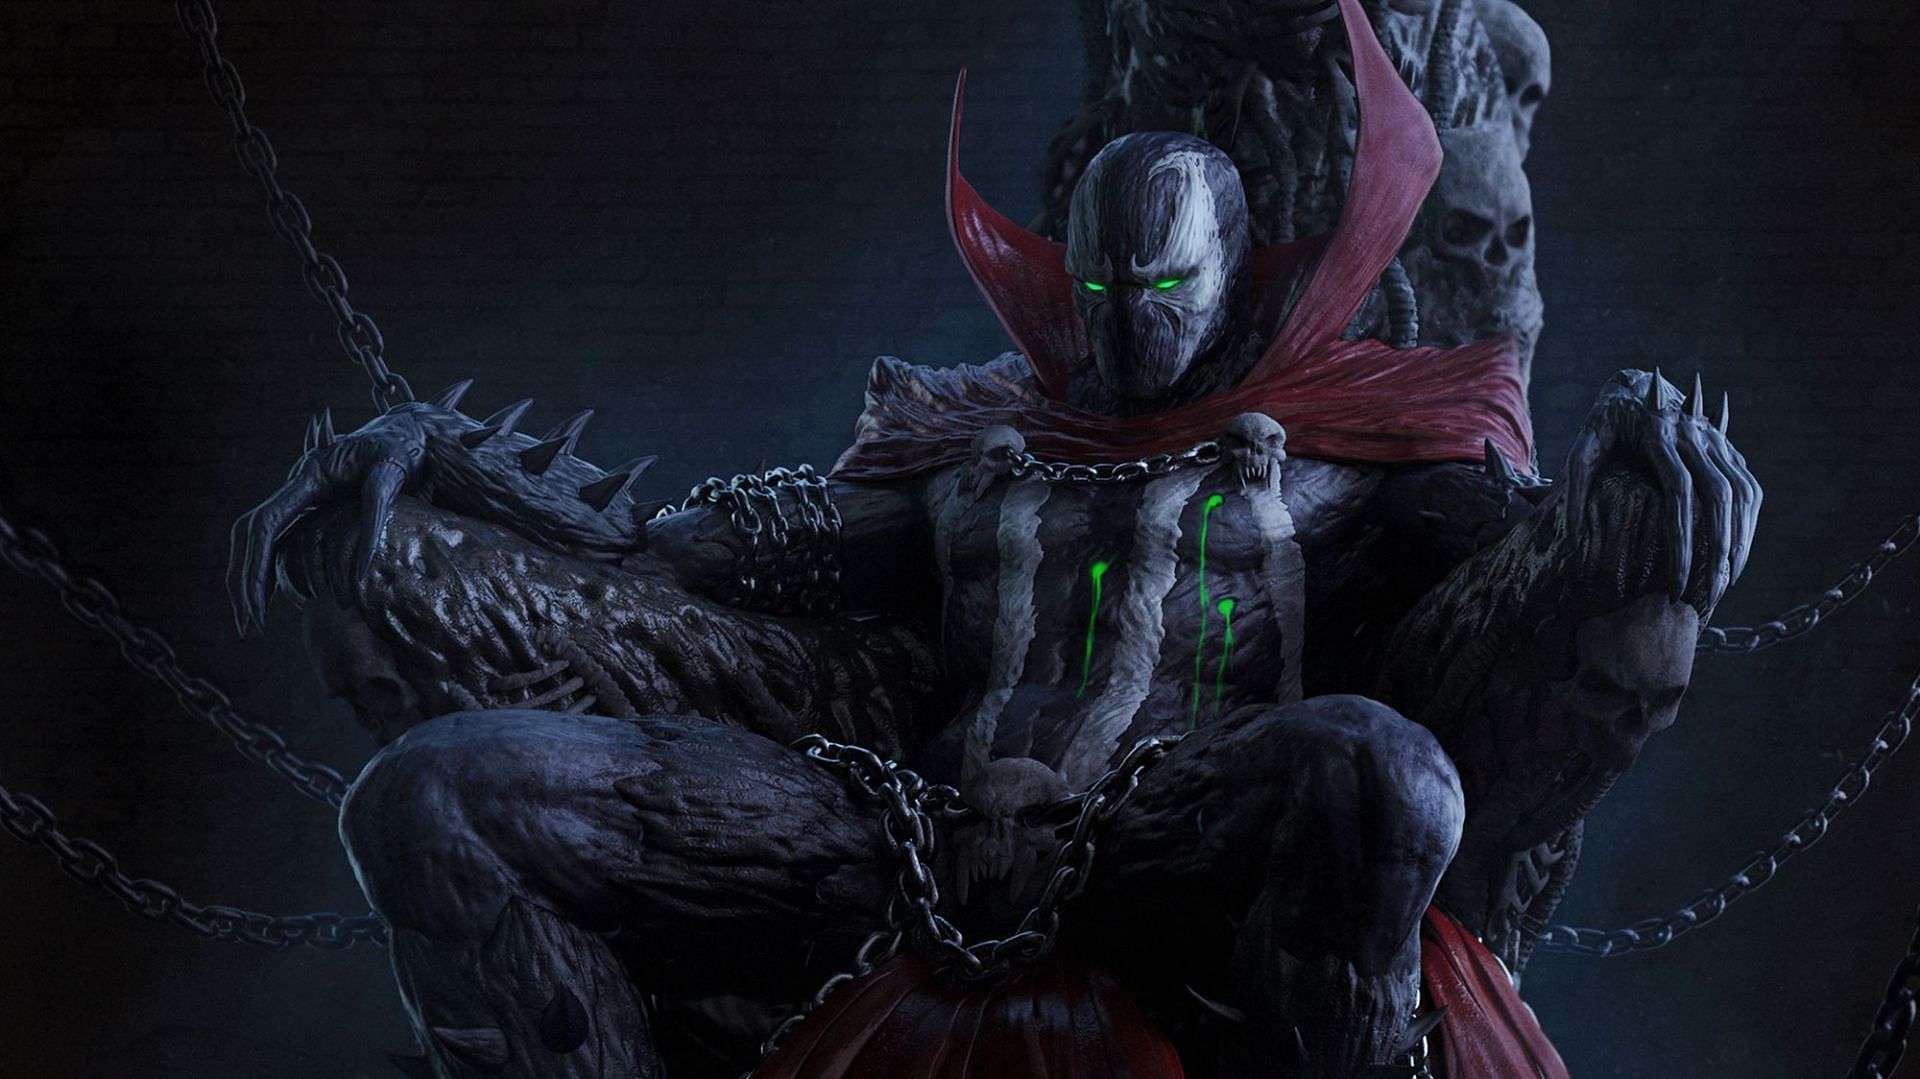 Unraveling the Mystery: The truth about Spawn